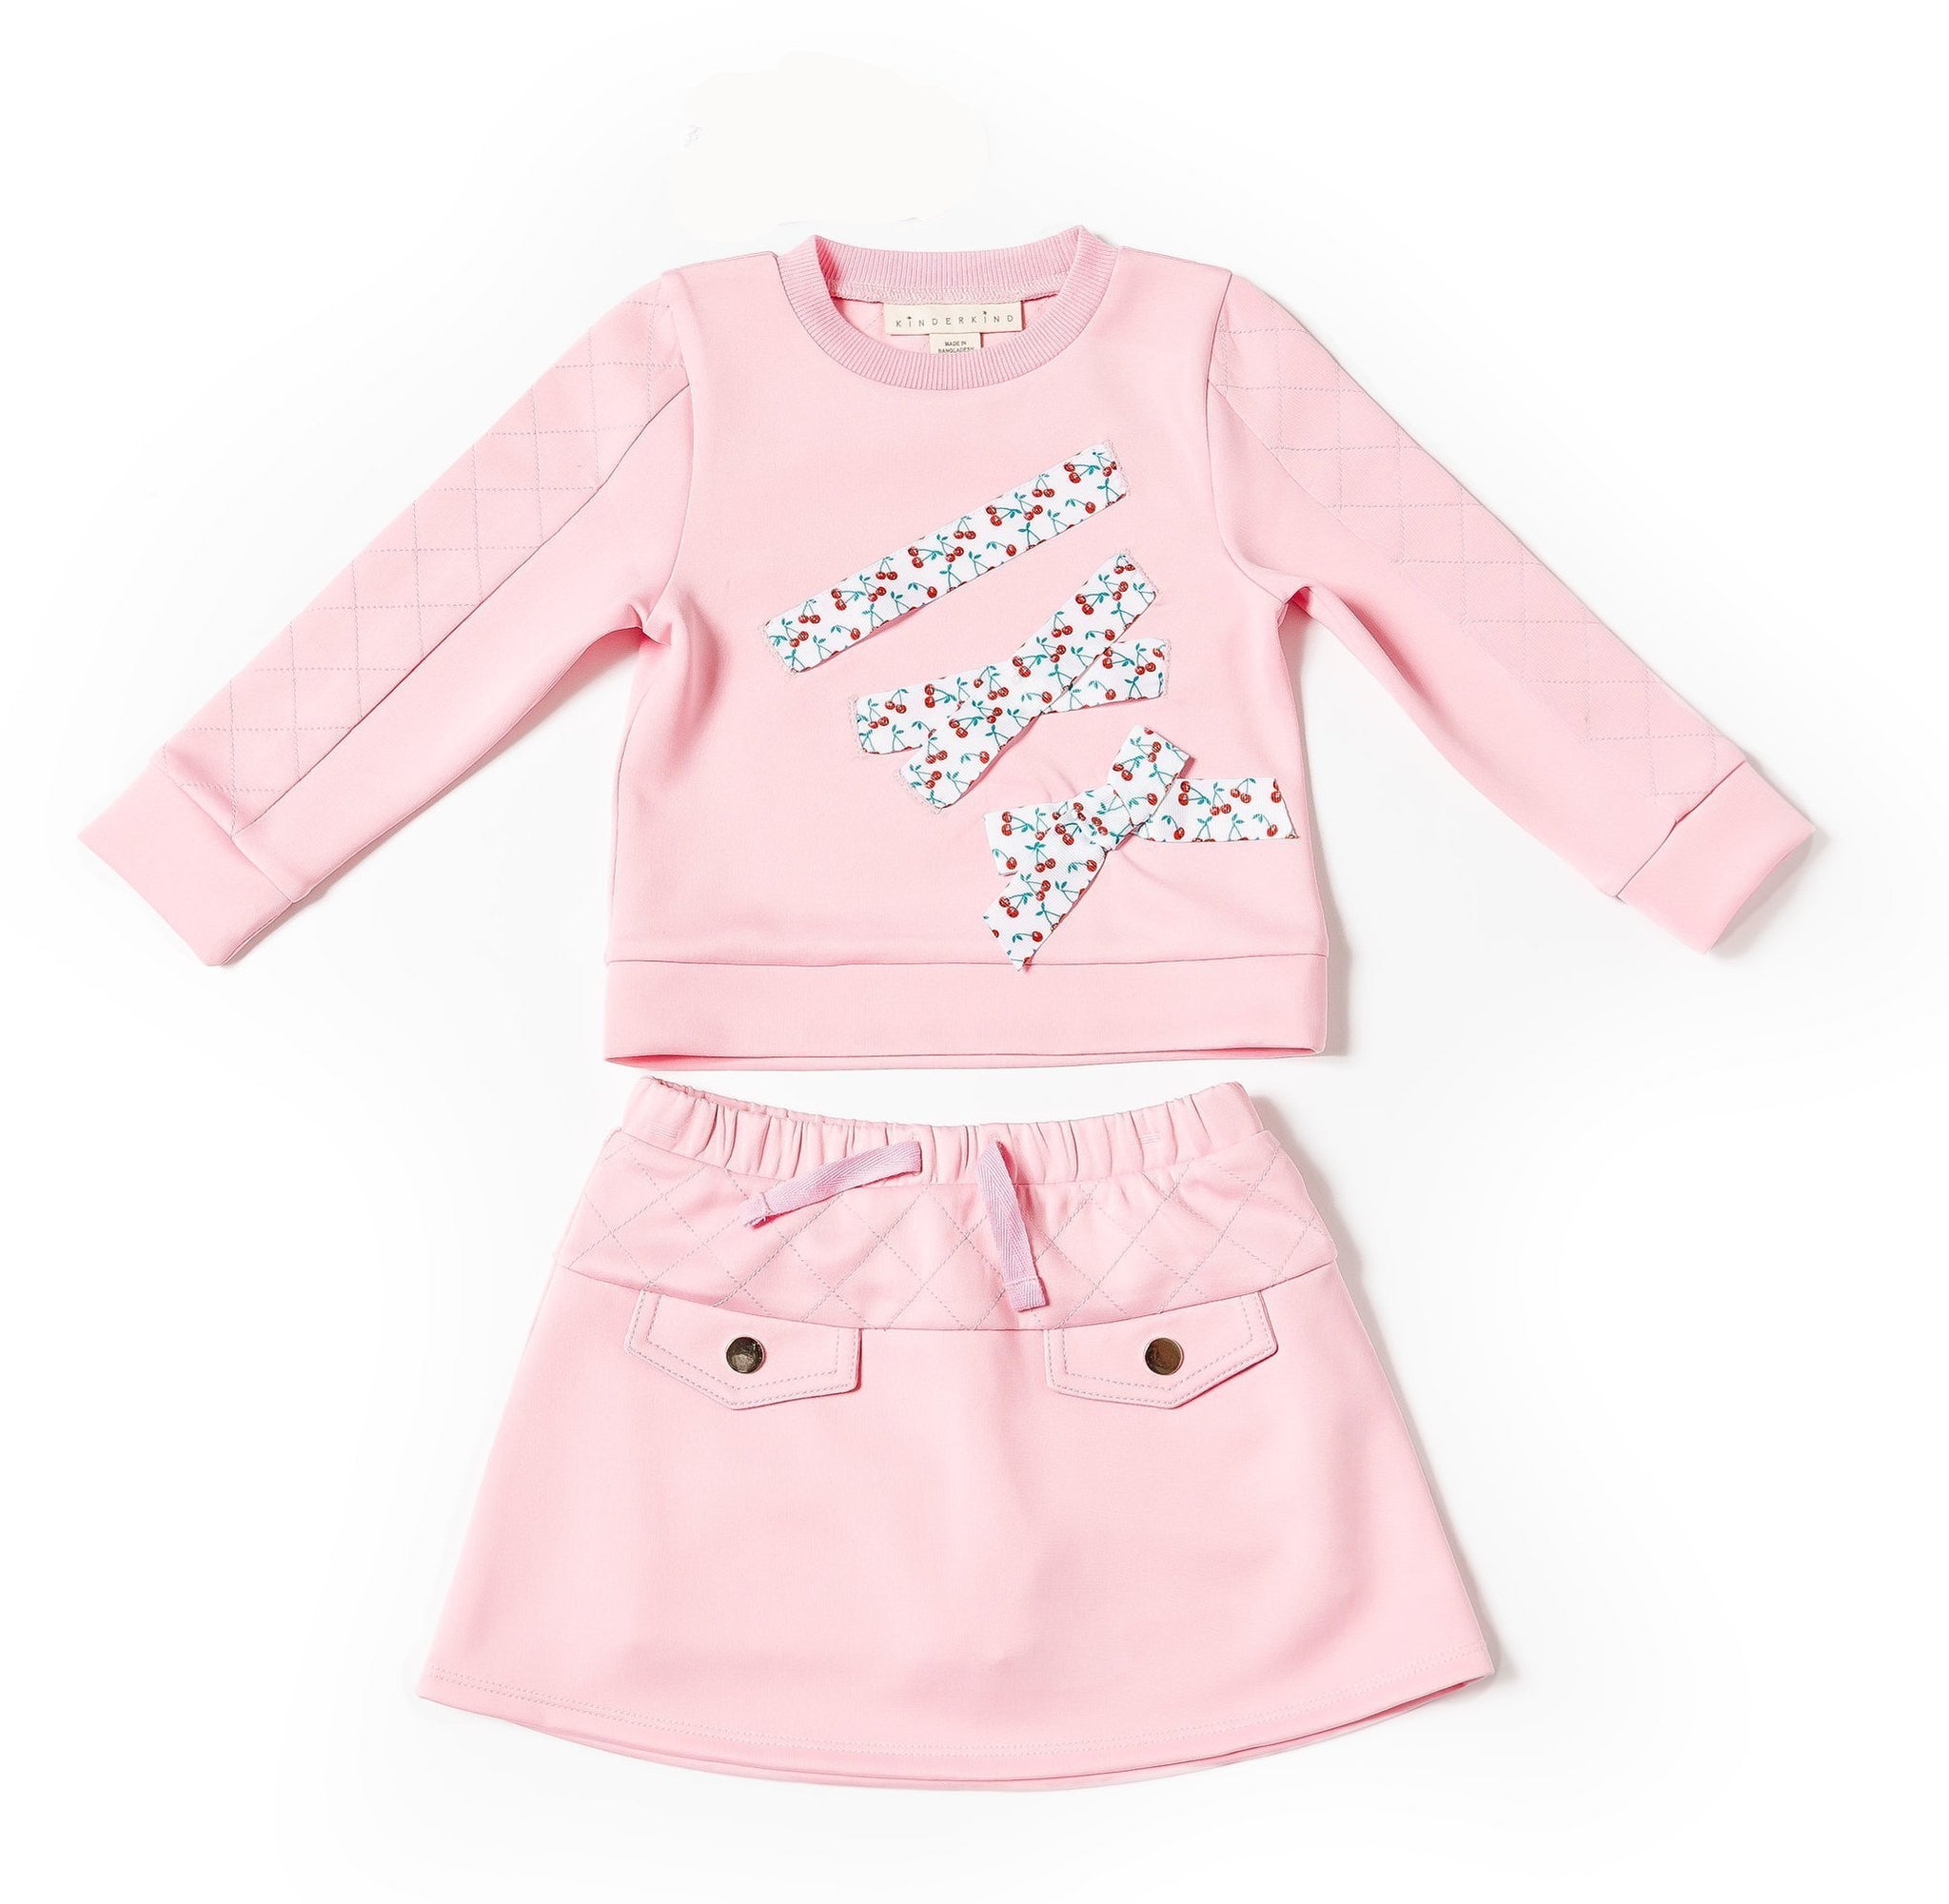 2t baby girl clothes